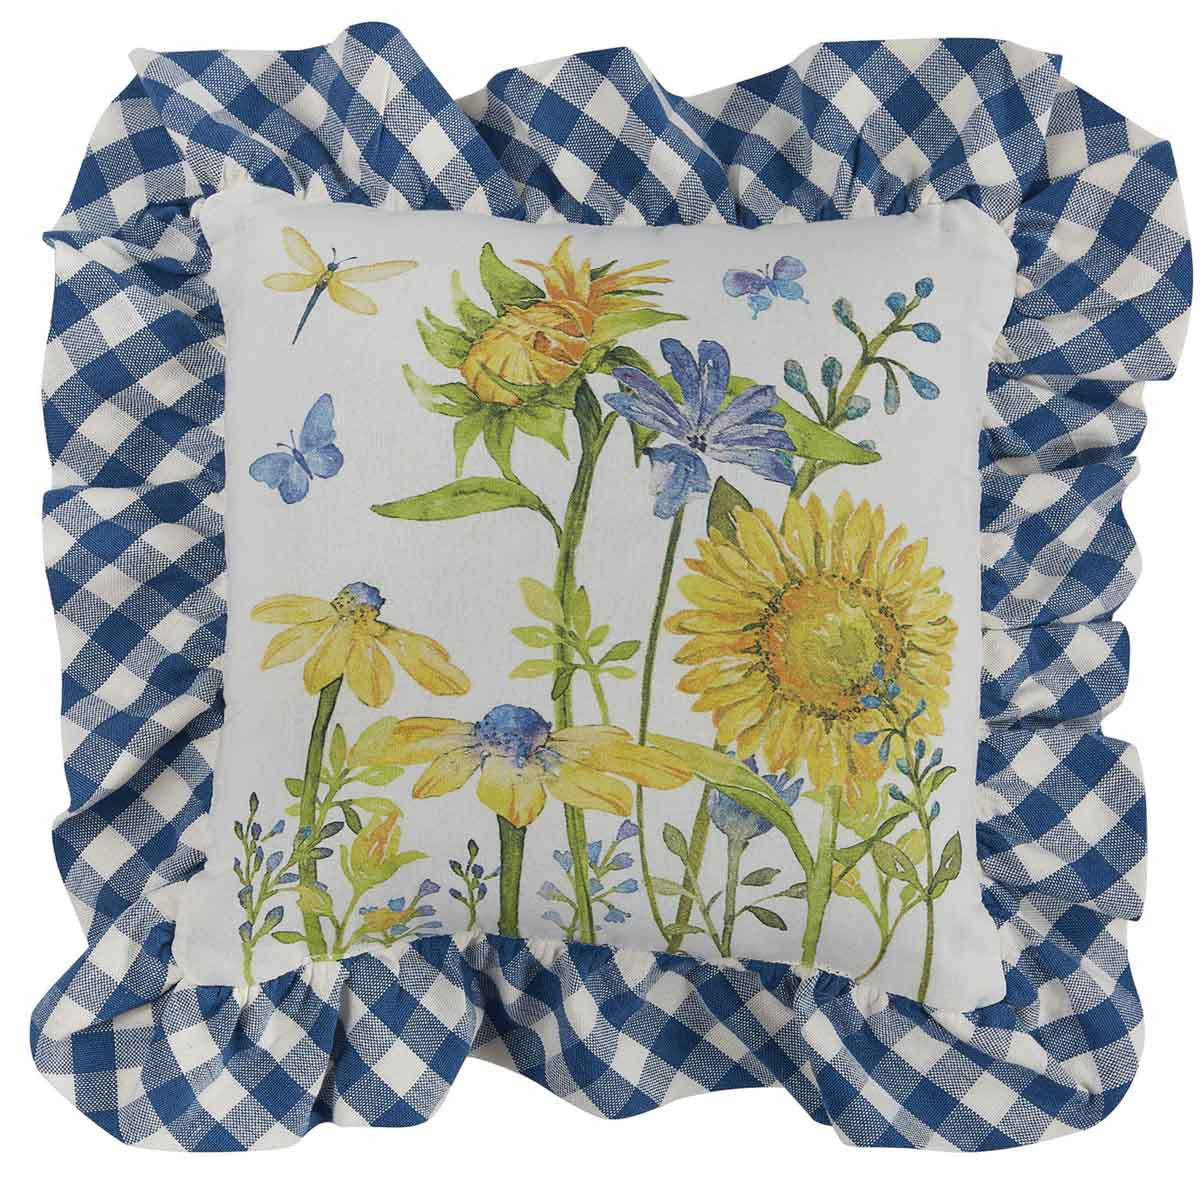 Sunny Day Pillow - 10" Park Designs